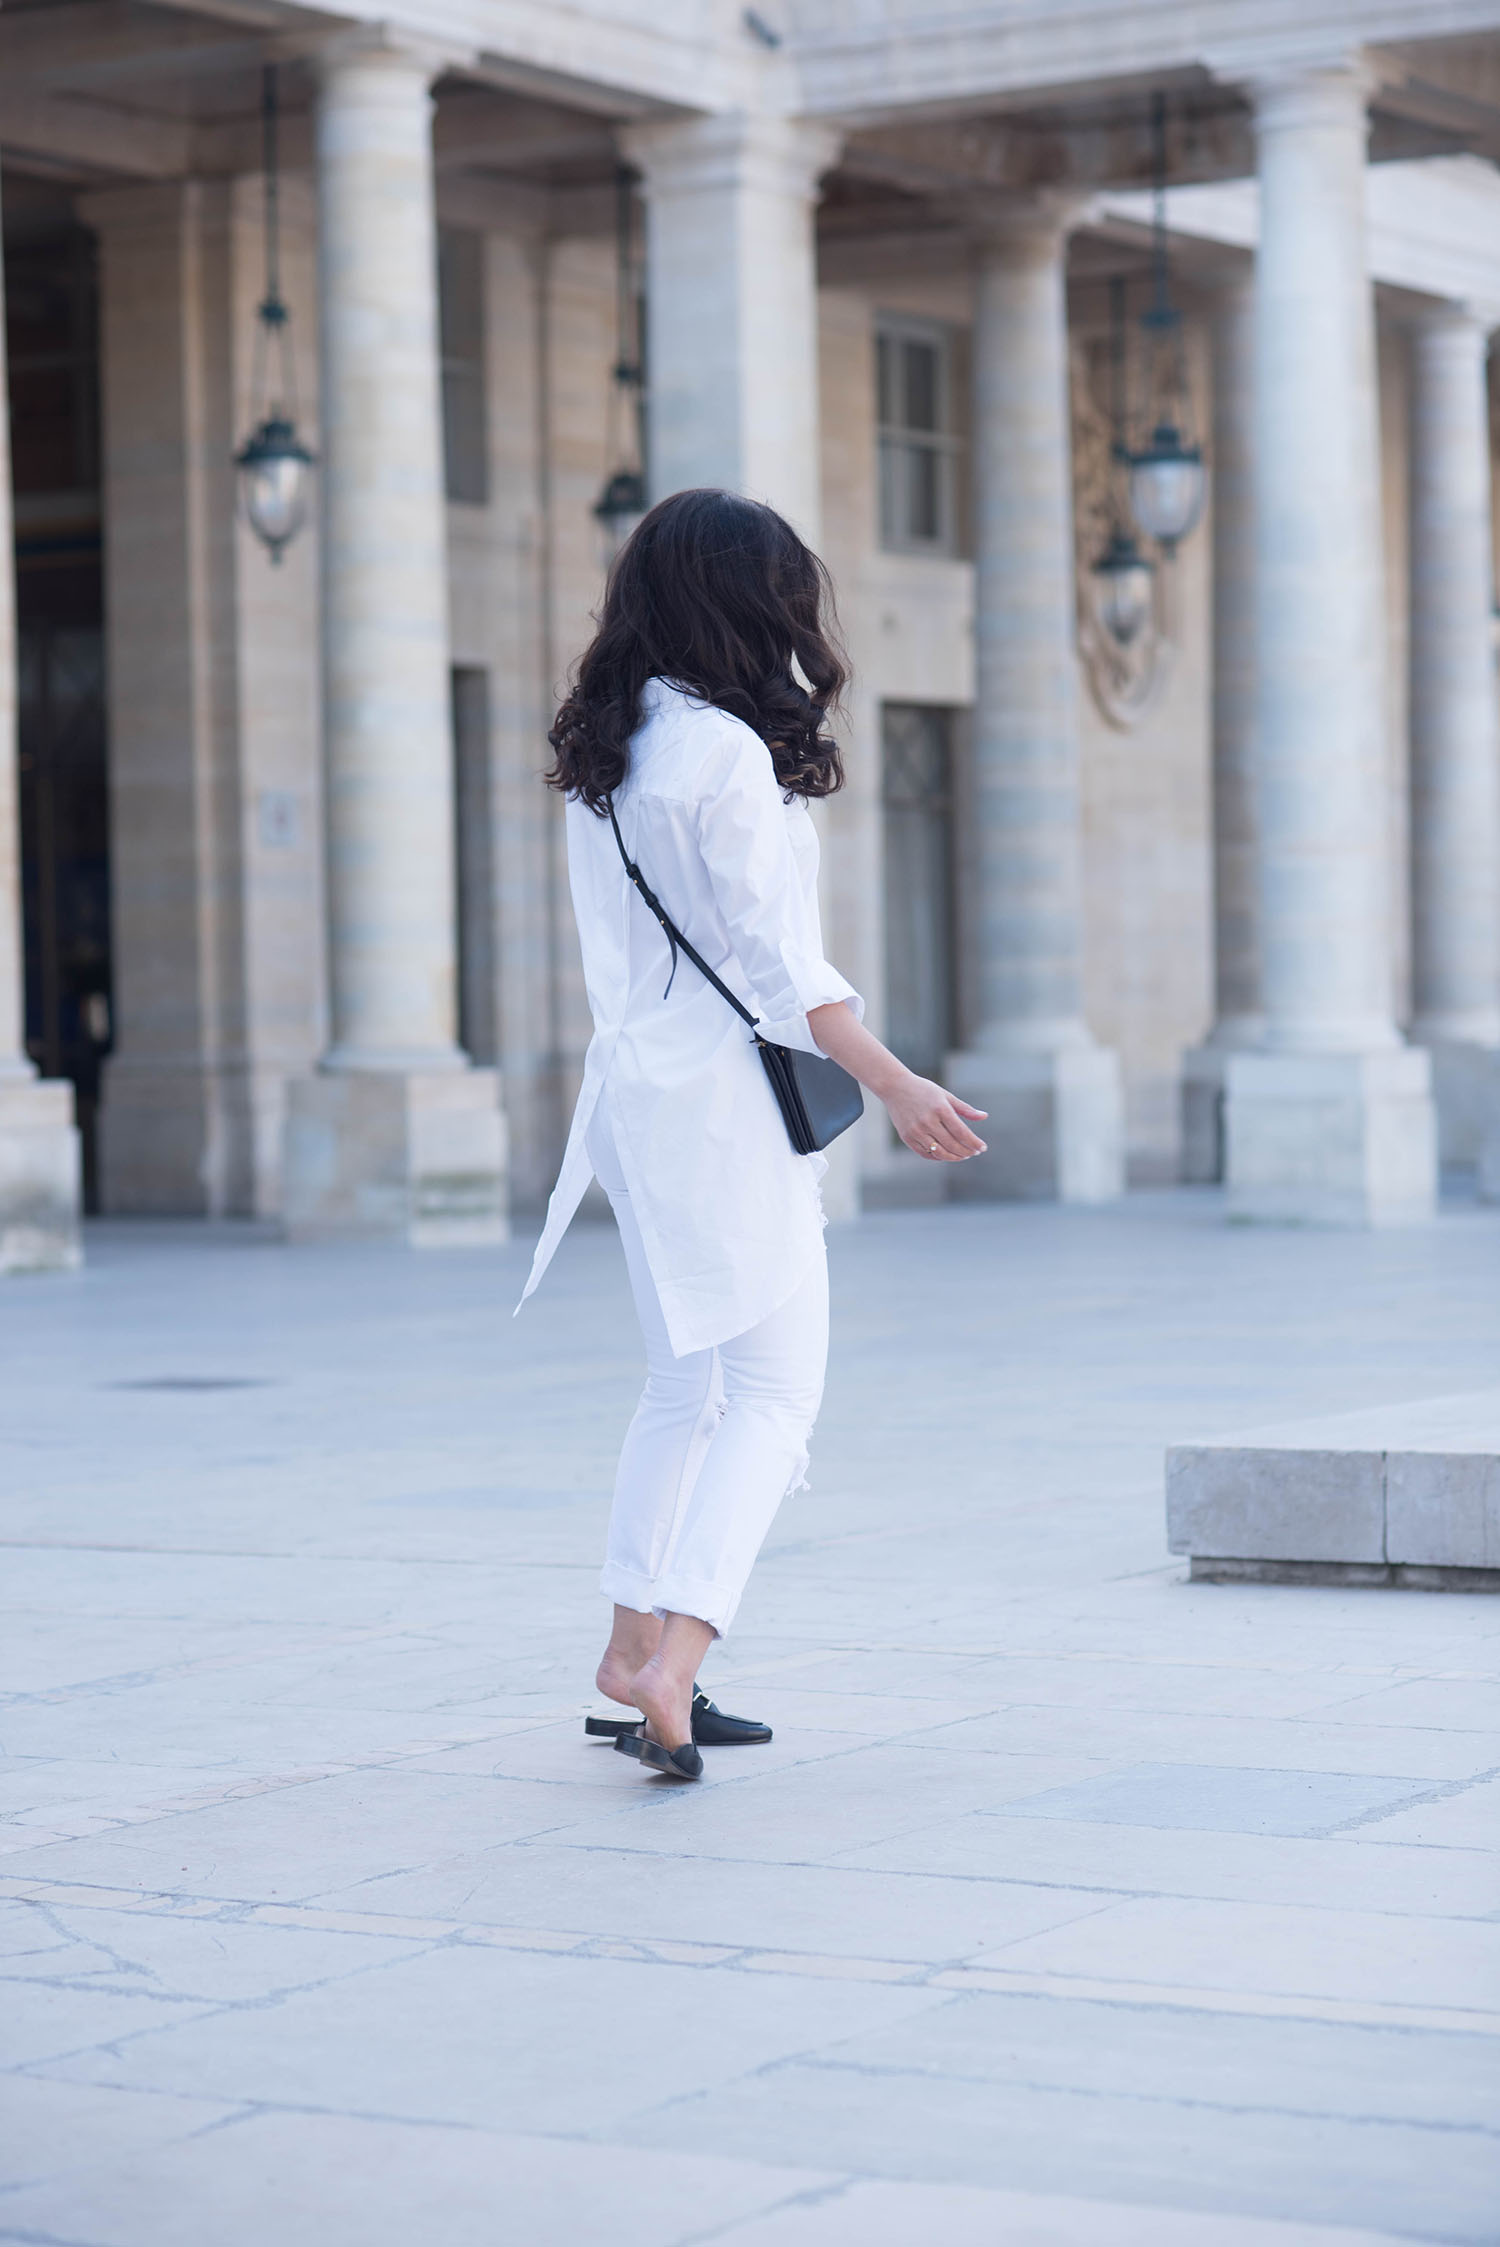 Canadian fashion blogger Cee Fardoe of Coco & Vera twirls in the Palais Royal, wearing Jonak mules and a Marled white blouse